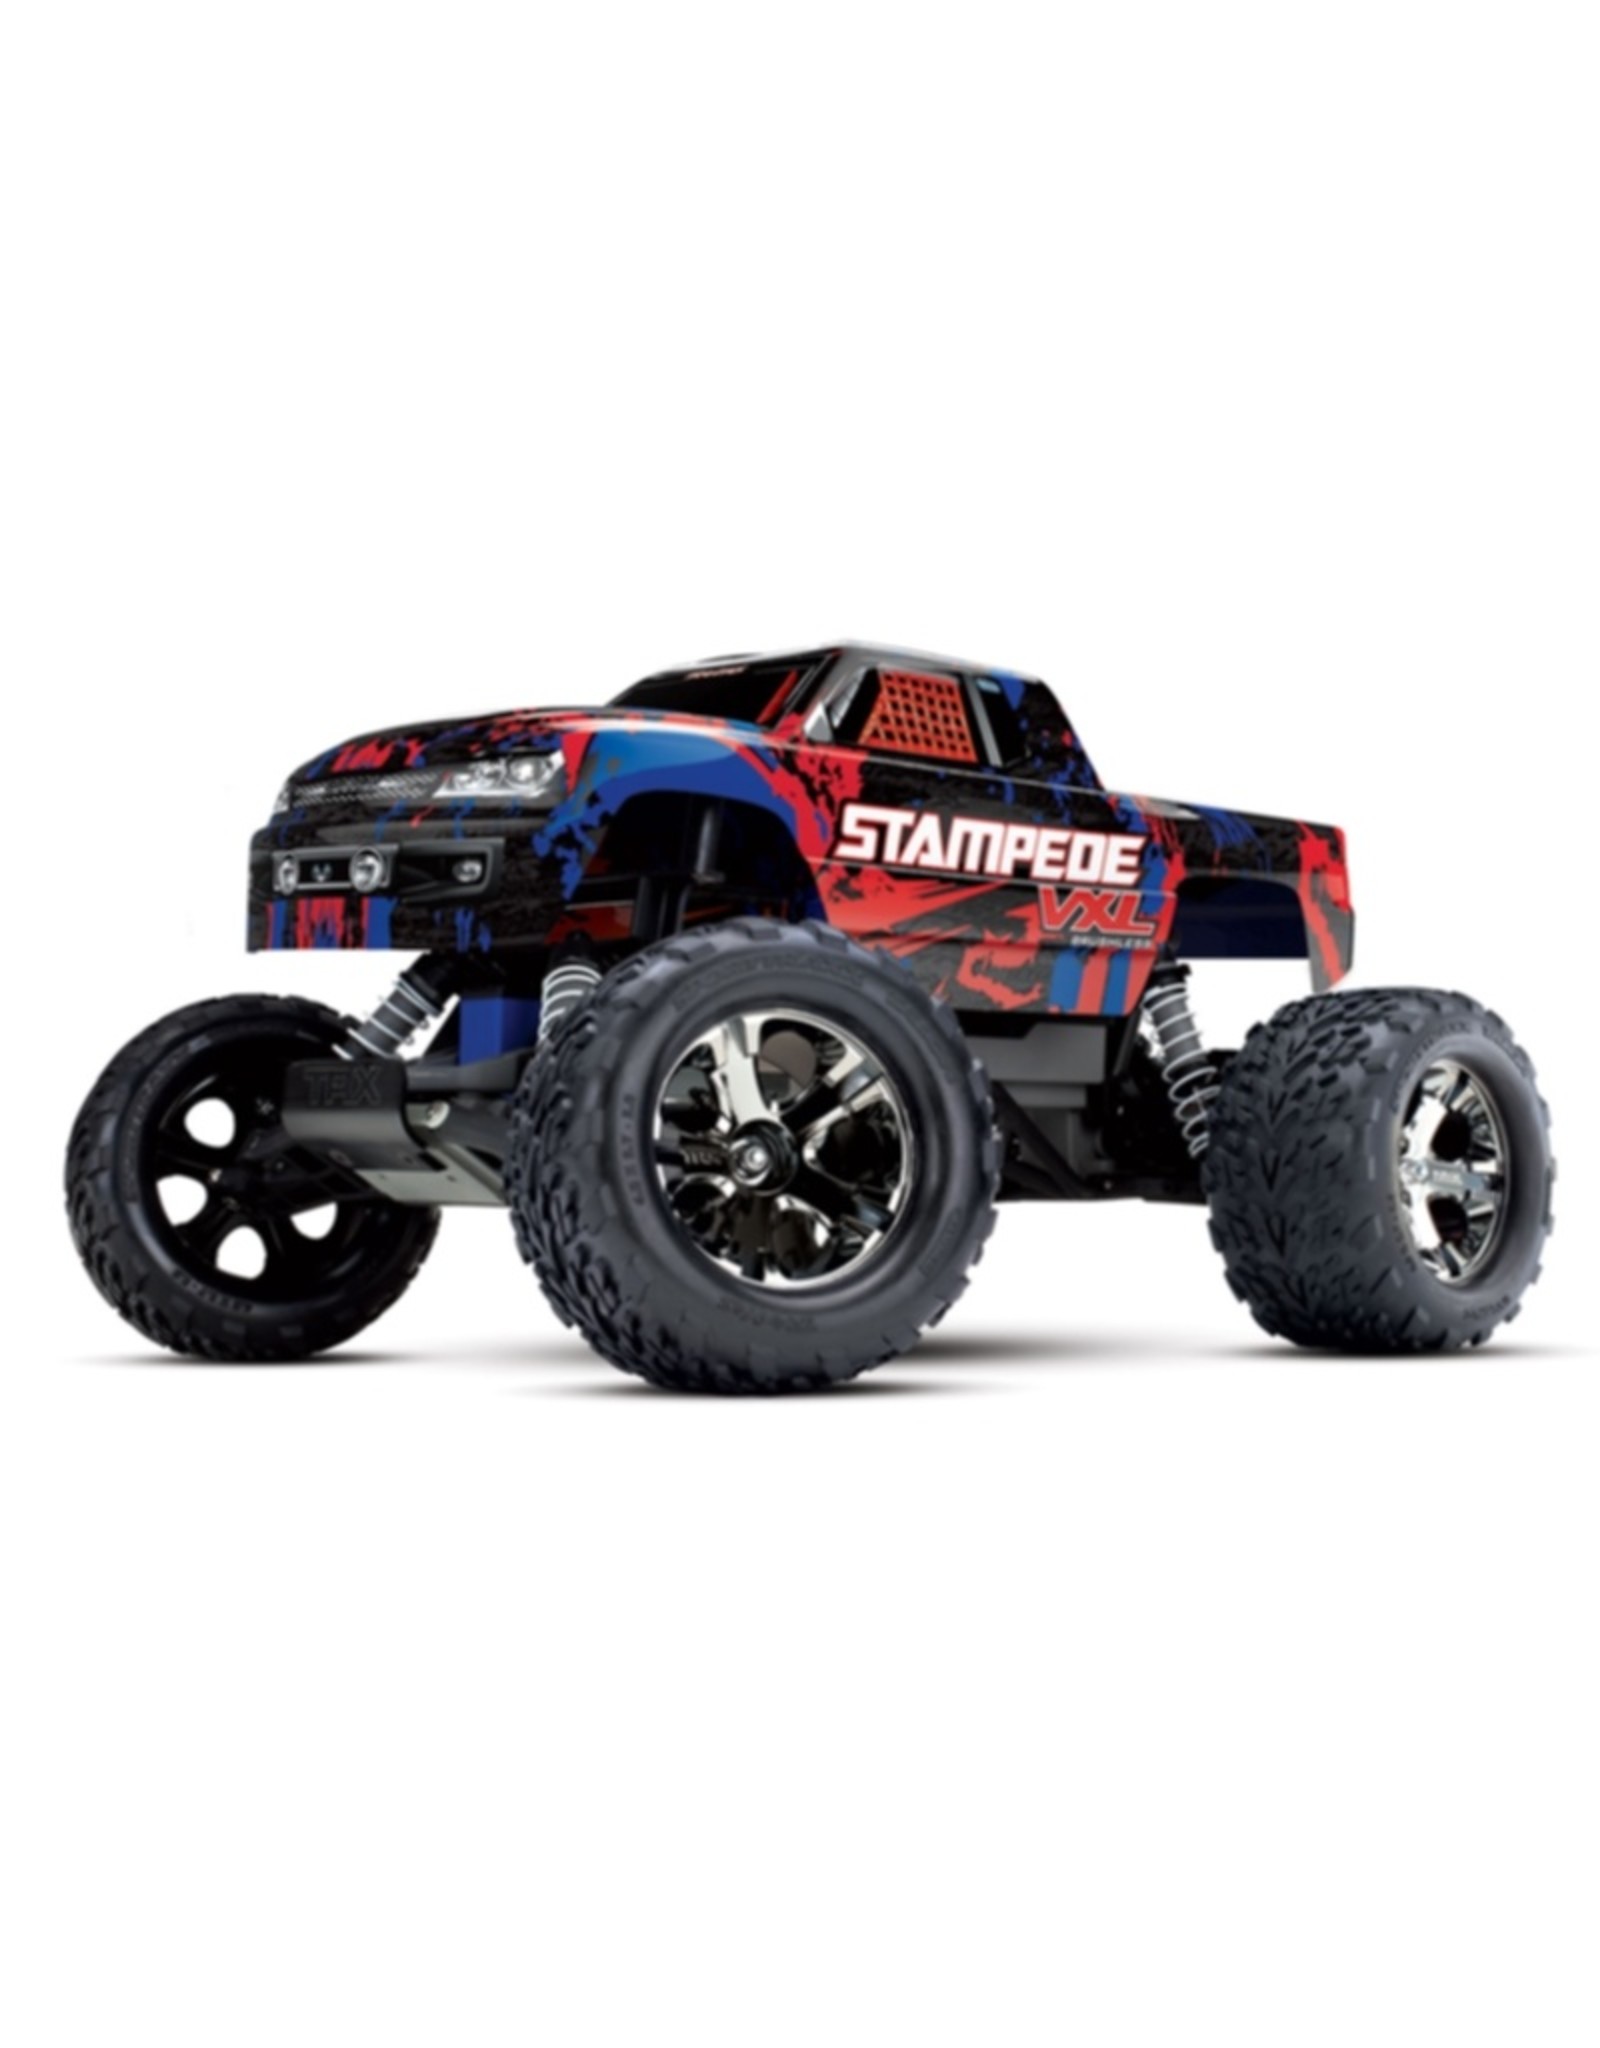 Traxxas TRA36076-4 RED Stampede VXL 1:10 Scale 2wd Monster Truck